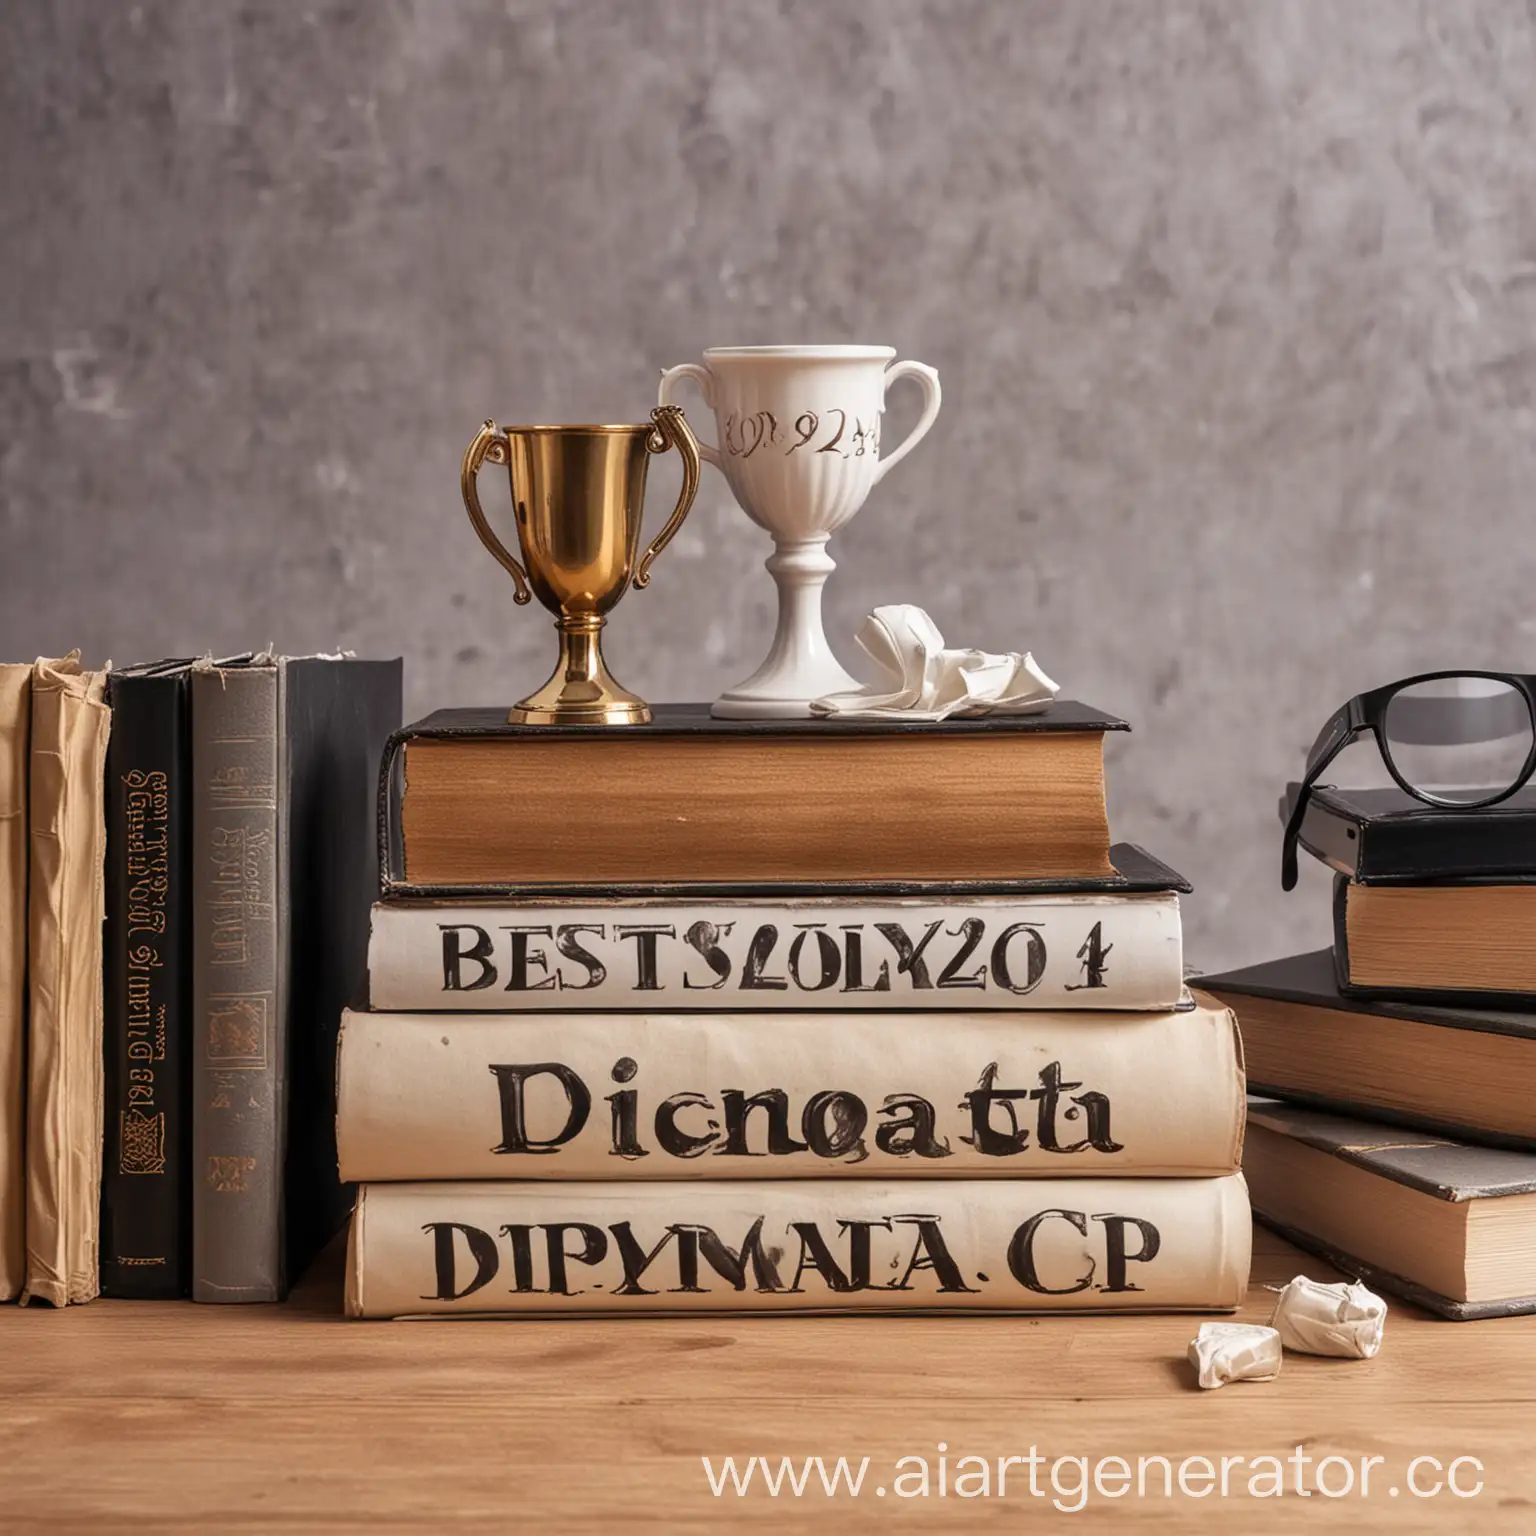 Academic-Excellence-Capturing-the-Spirit-of-Best-Student-2024-with-Books-Sports-Cups-and-Diplomas